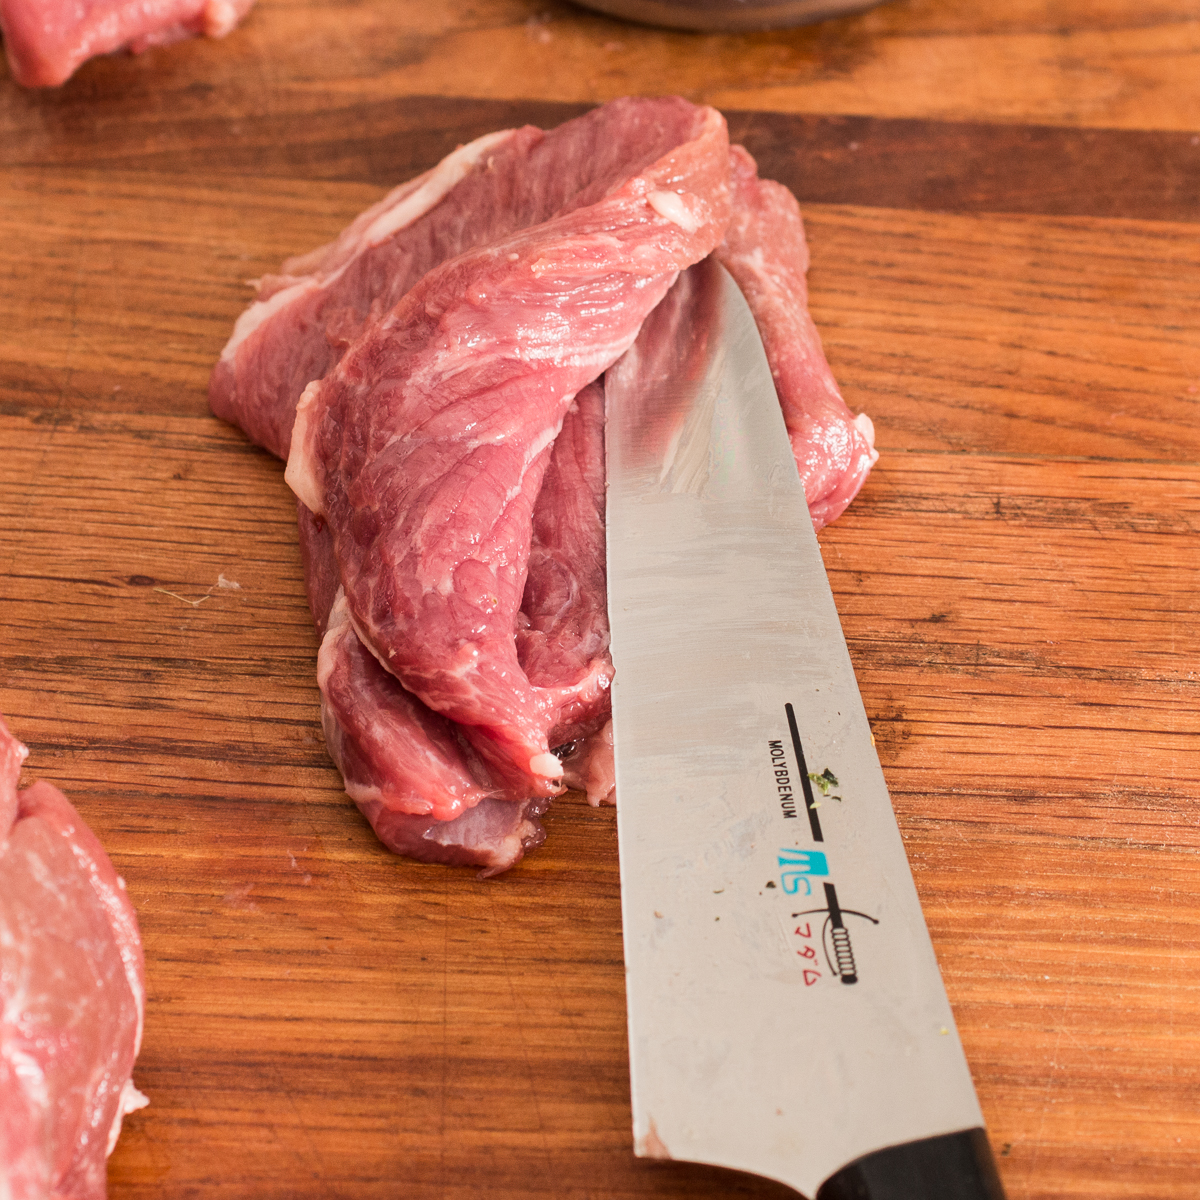 Cutting open a thick slice of lamb scallopini with a knife to butterfly it.